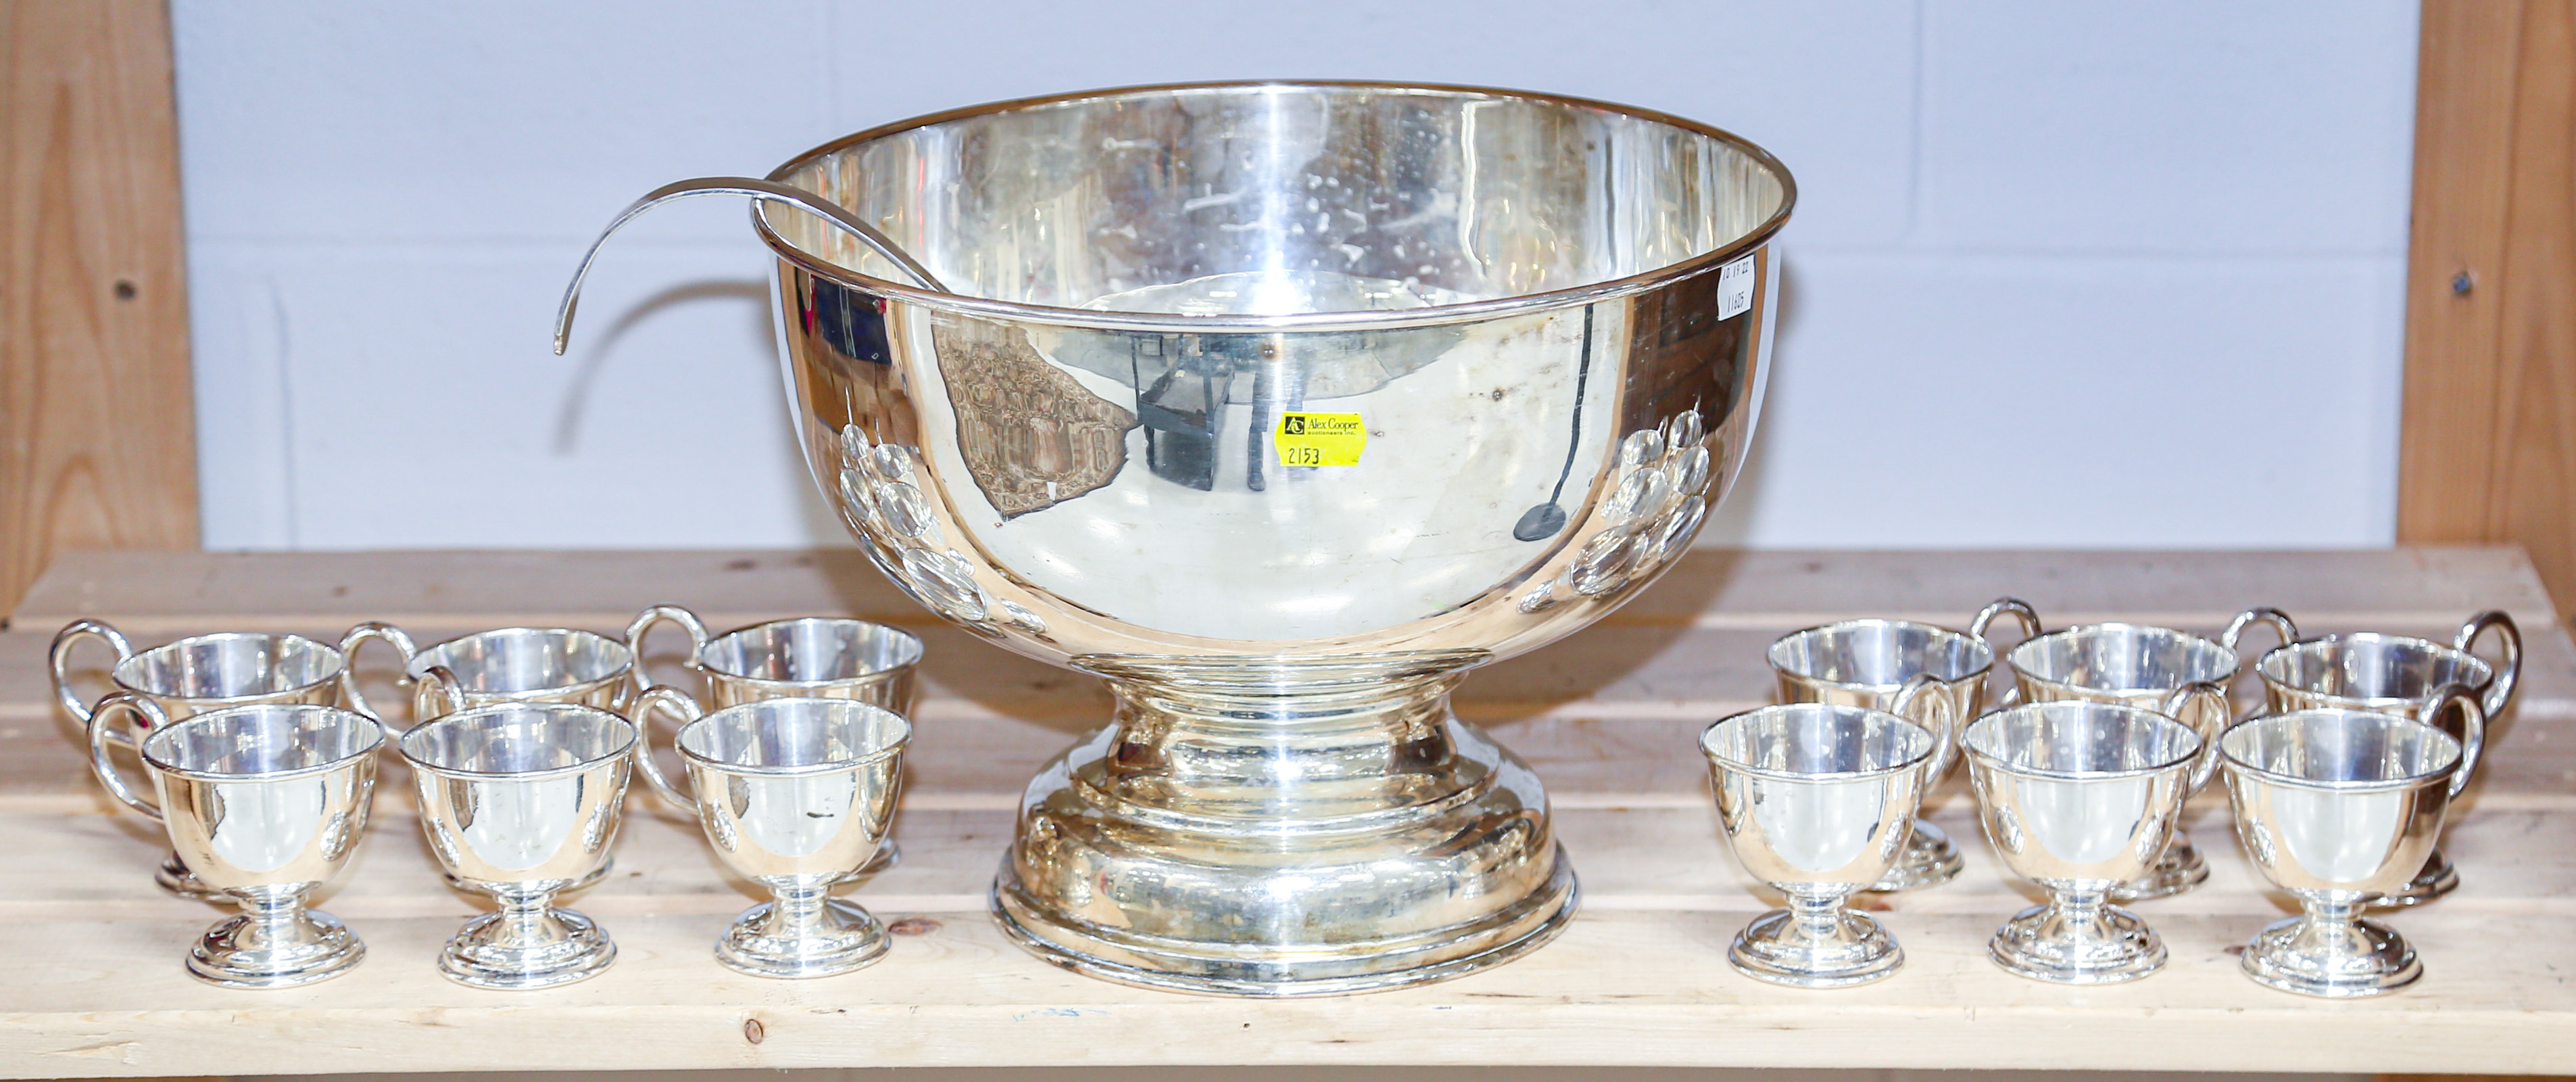 SILVER PLATED PUNCH BOWL WITH CUPS 369bfc